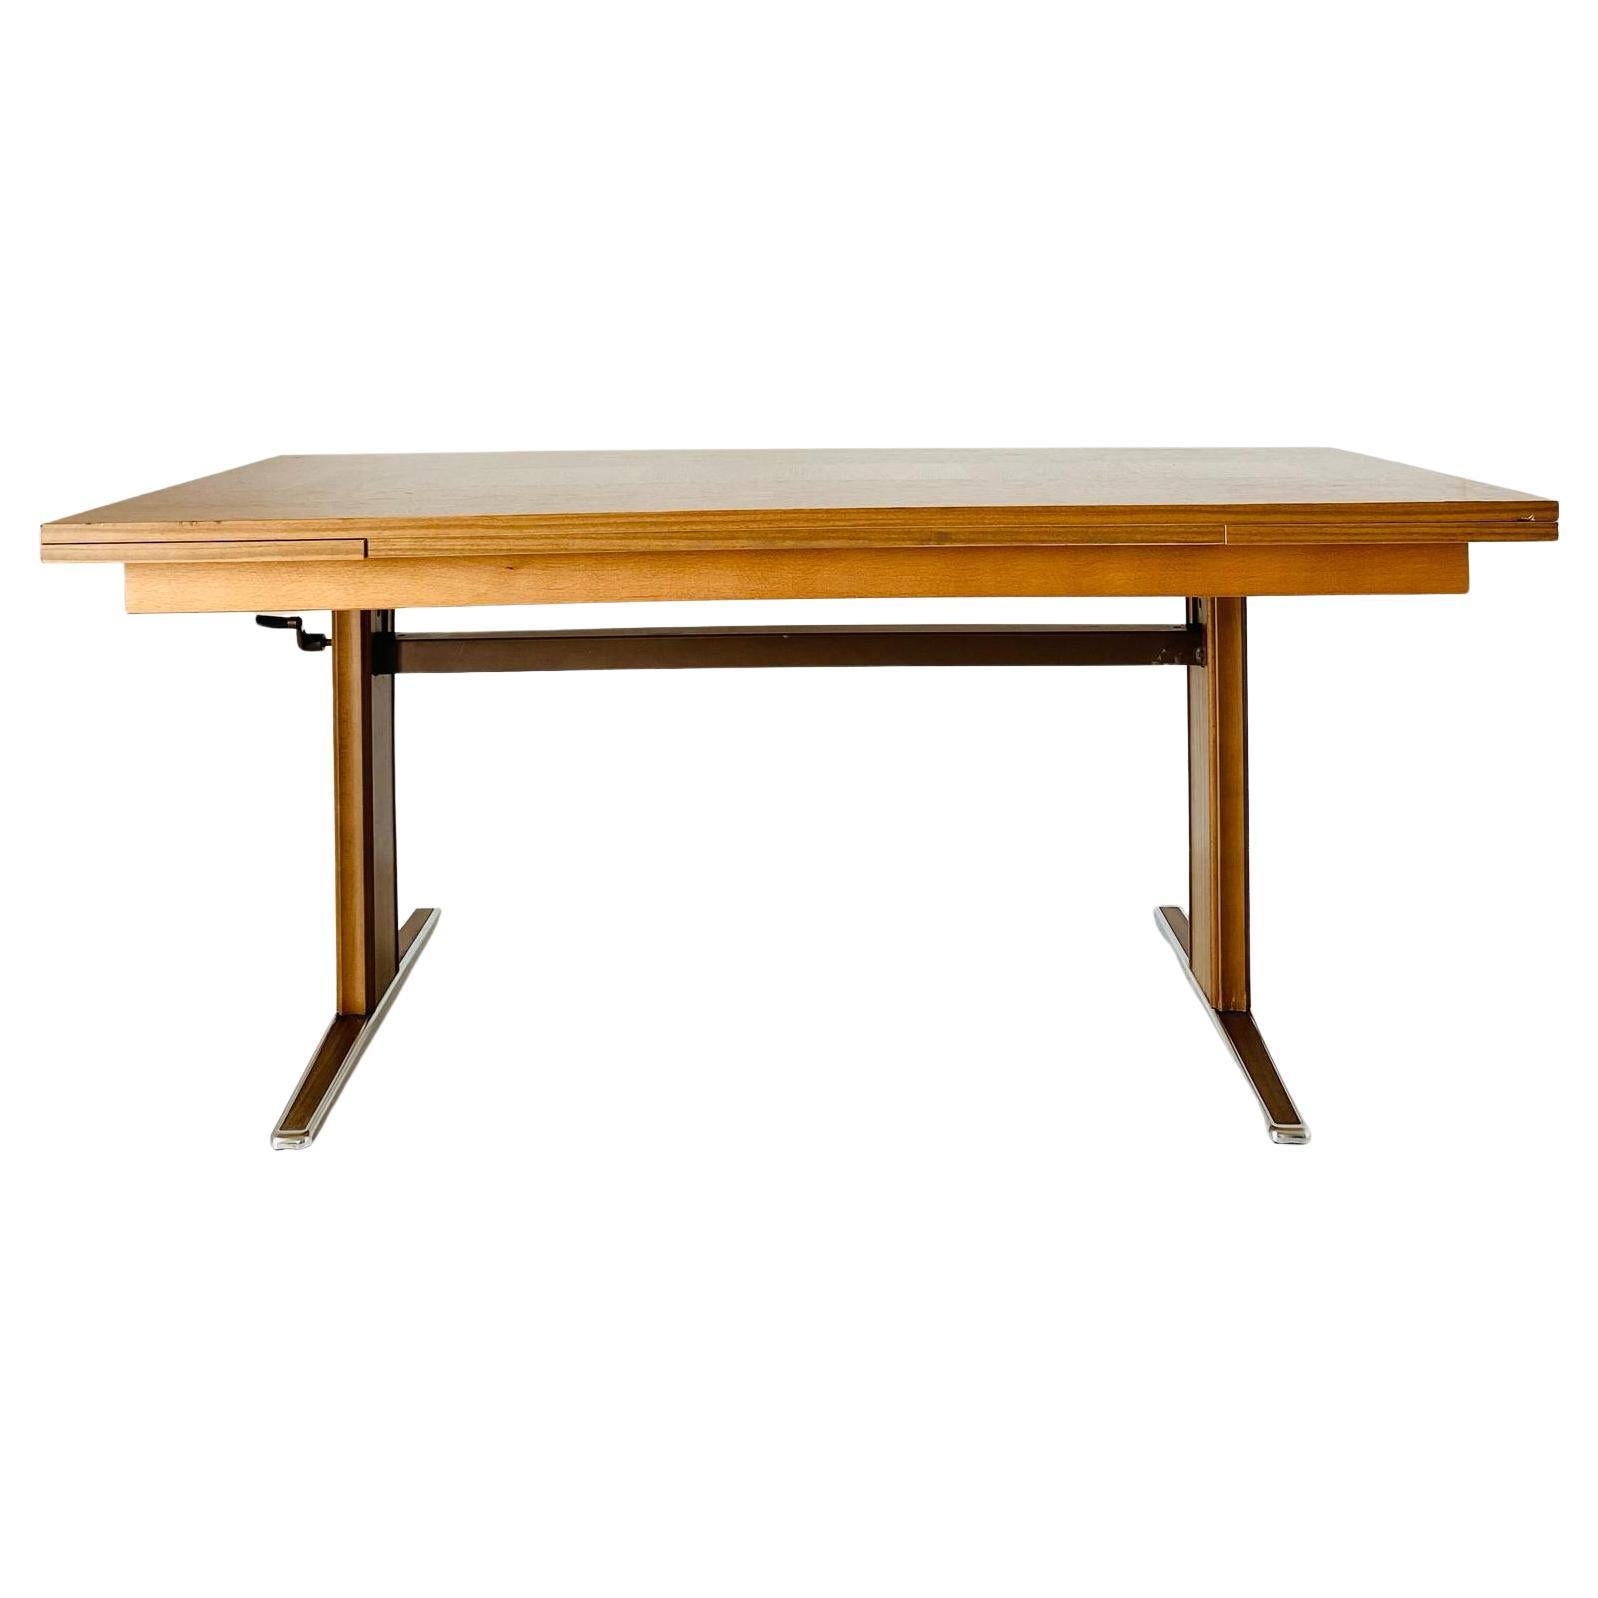 Vintage extendible coffee table, Italy 1970s.

Rare rectangular extendible coffee table with chrome feet. A mid-century Italian style vintage design piece. 

The table consists of a wood veneer top with the option to extend it either on the sides or